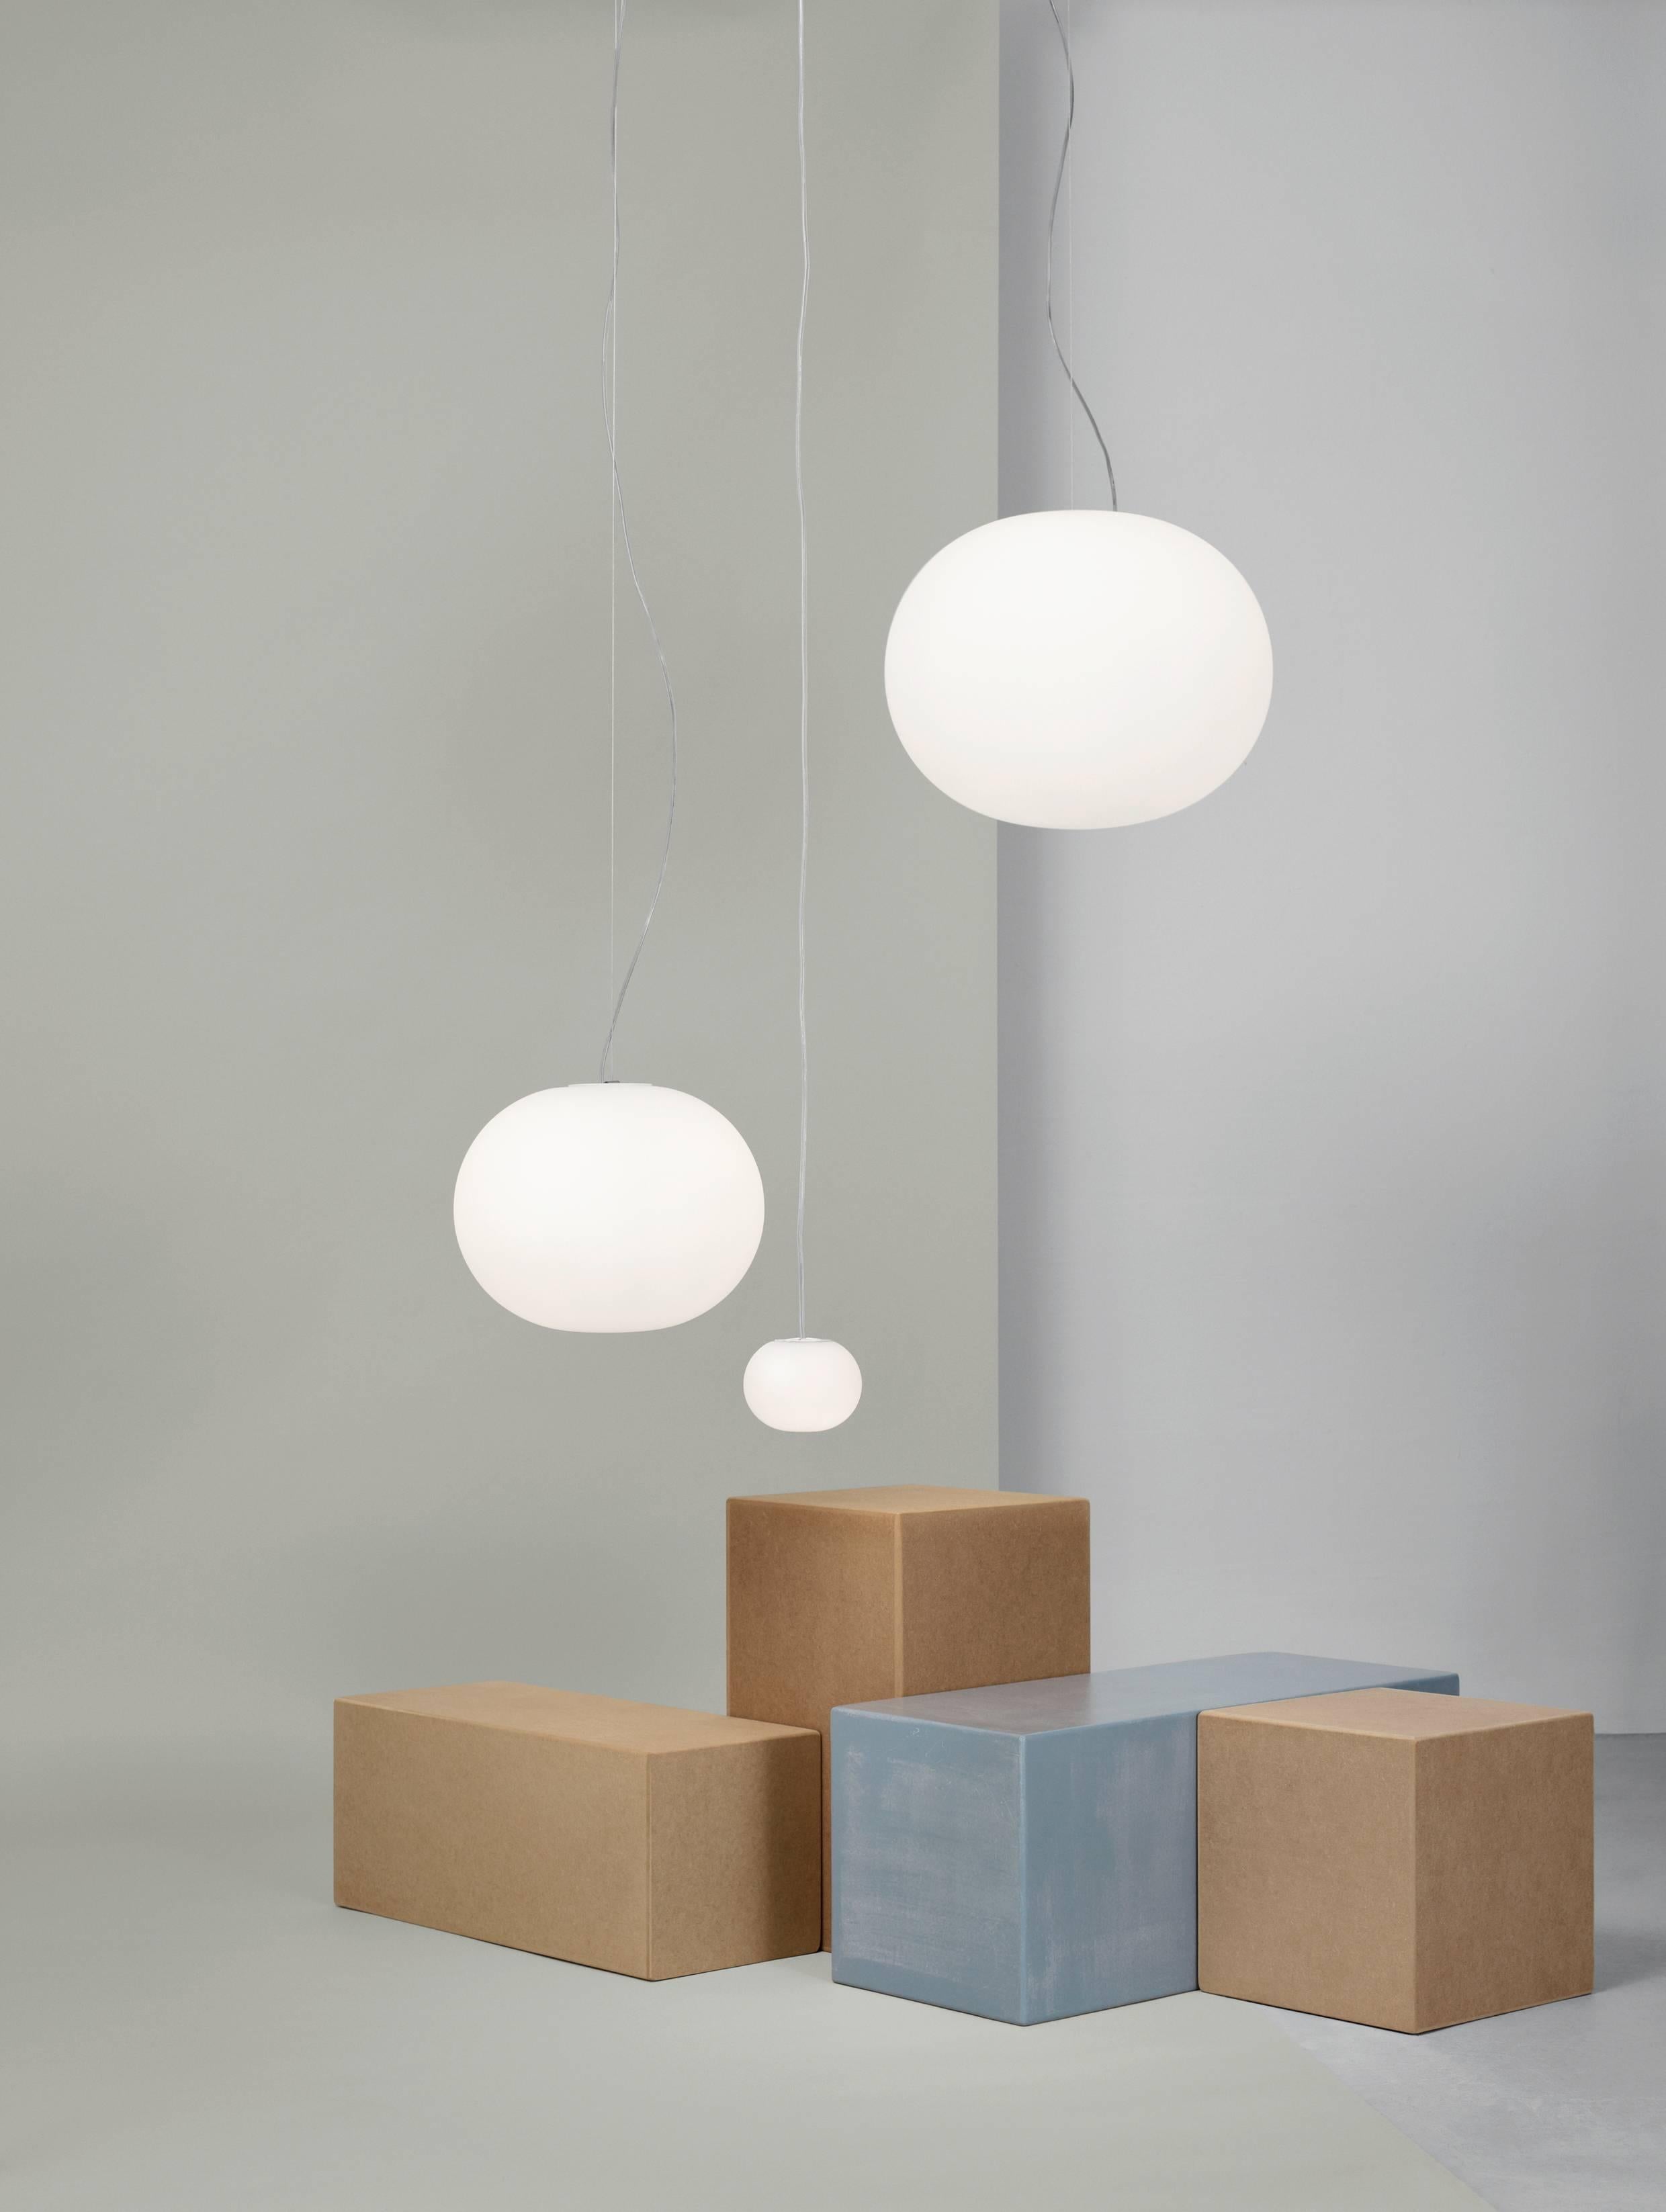 FLOS Glo-Ball S2 Fluorescent Pendant Light by Jasper Morrison
Marrying the functional with the otherworldly, the Glo-Ball S by Jasper Morrison is a remarkably versatile design that punctuates any room it is featured in. Its diffuser is made of